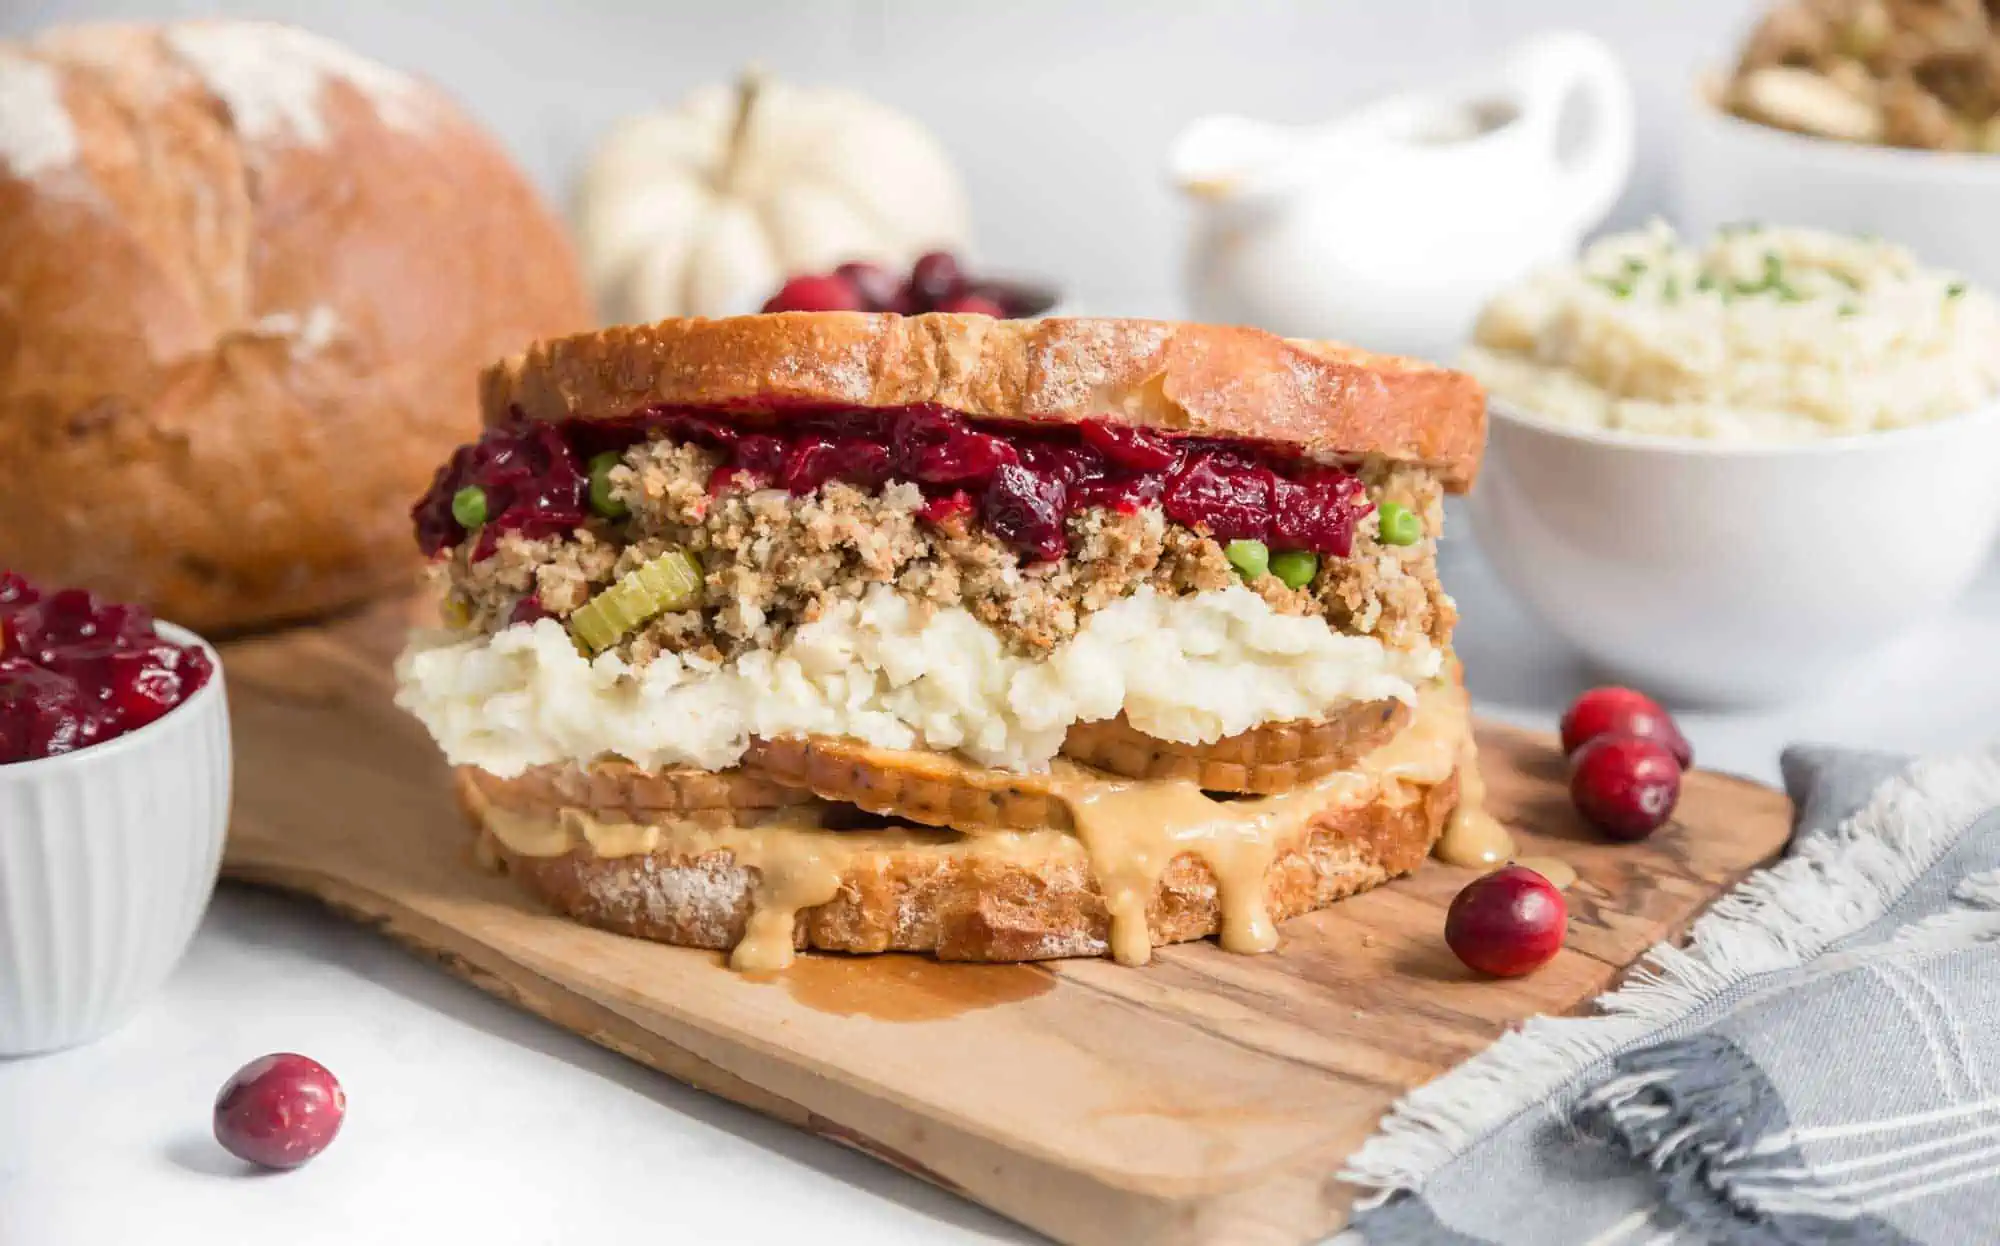 An air-fried vegan Thanksgiving leftovers sandwich on a wooden serving board.